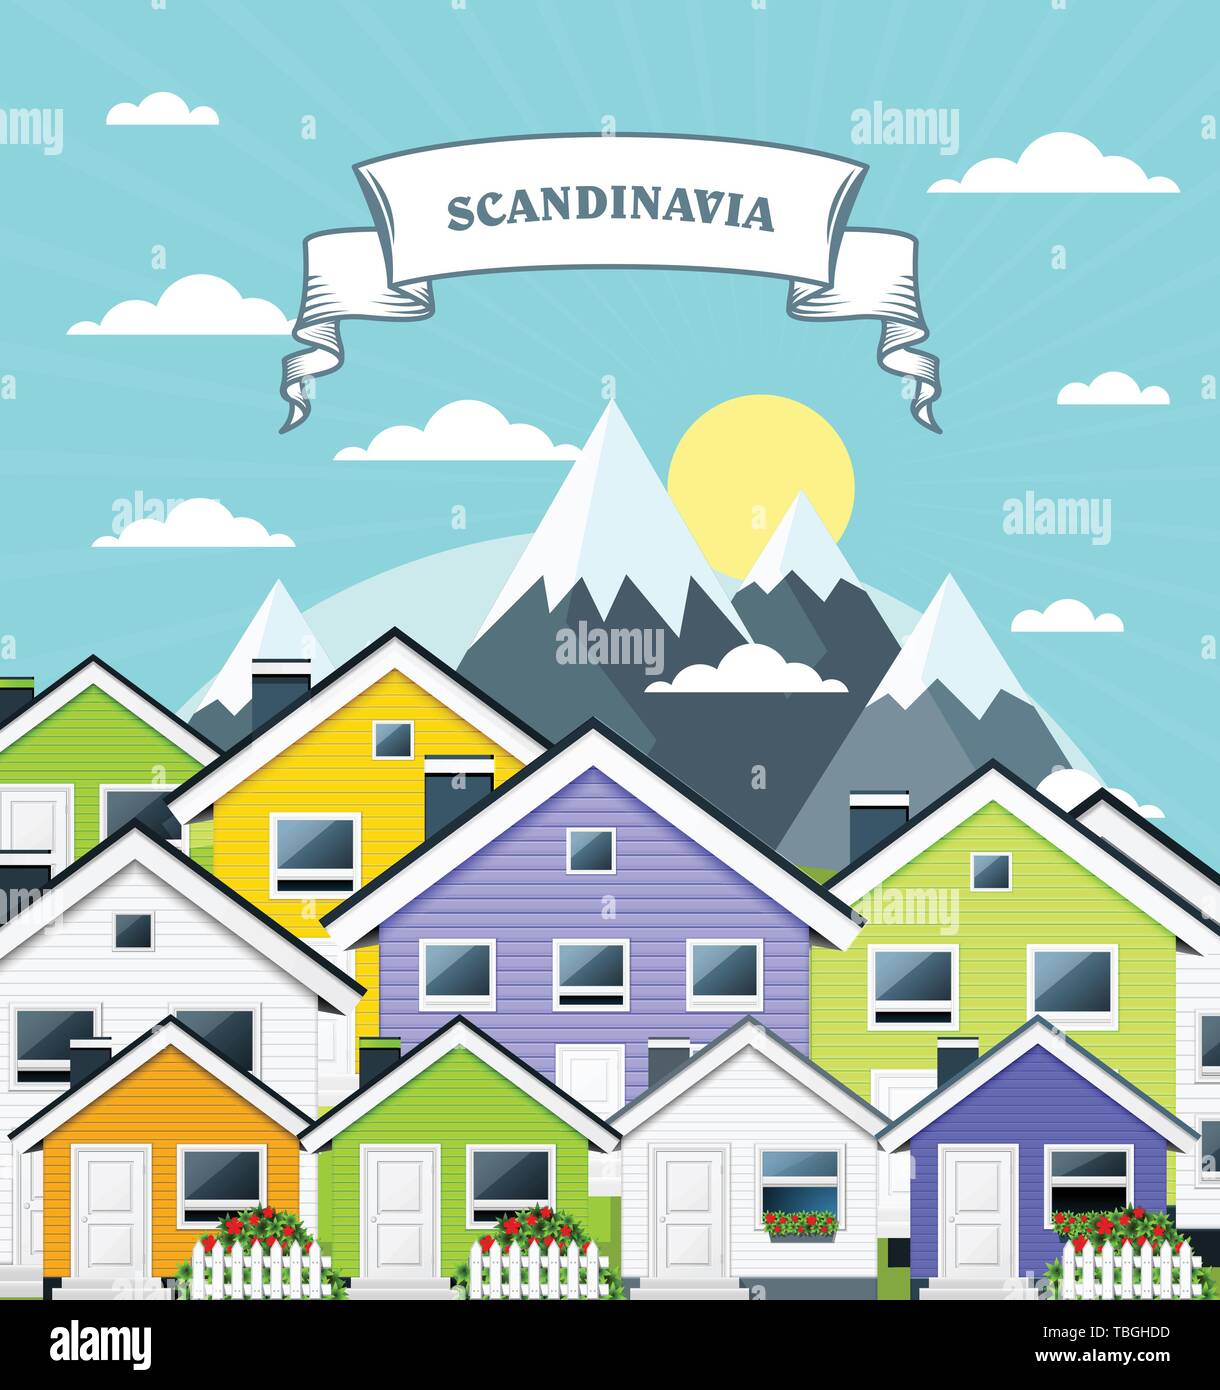 Small village in Norway, Scandinavia - variegated country town houses and mountains Stock Vector